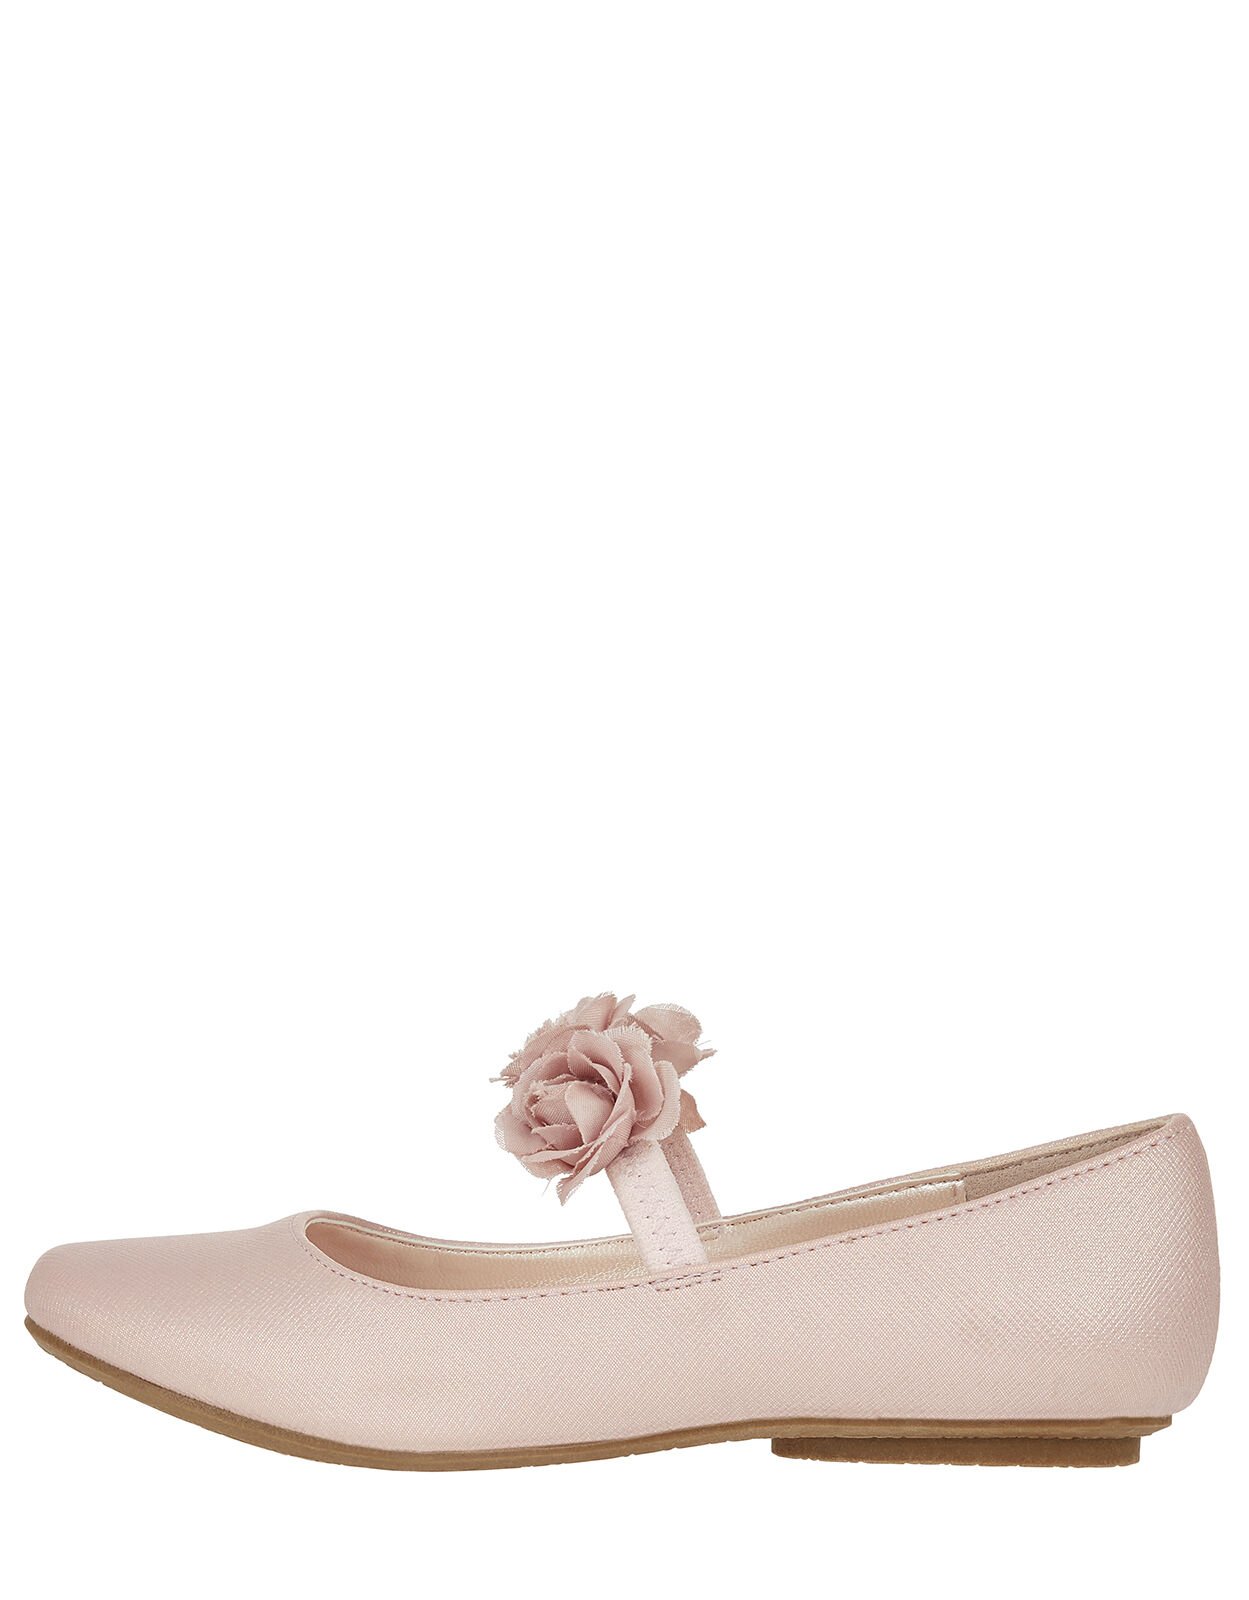 pale pink flat shoes